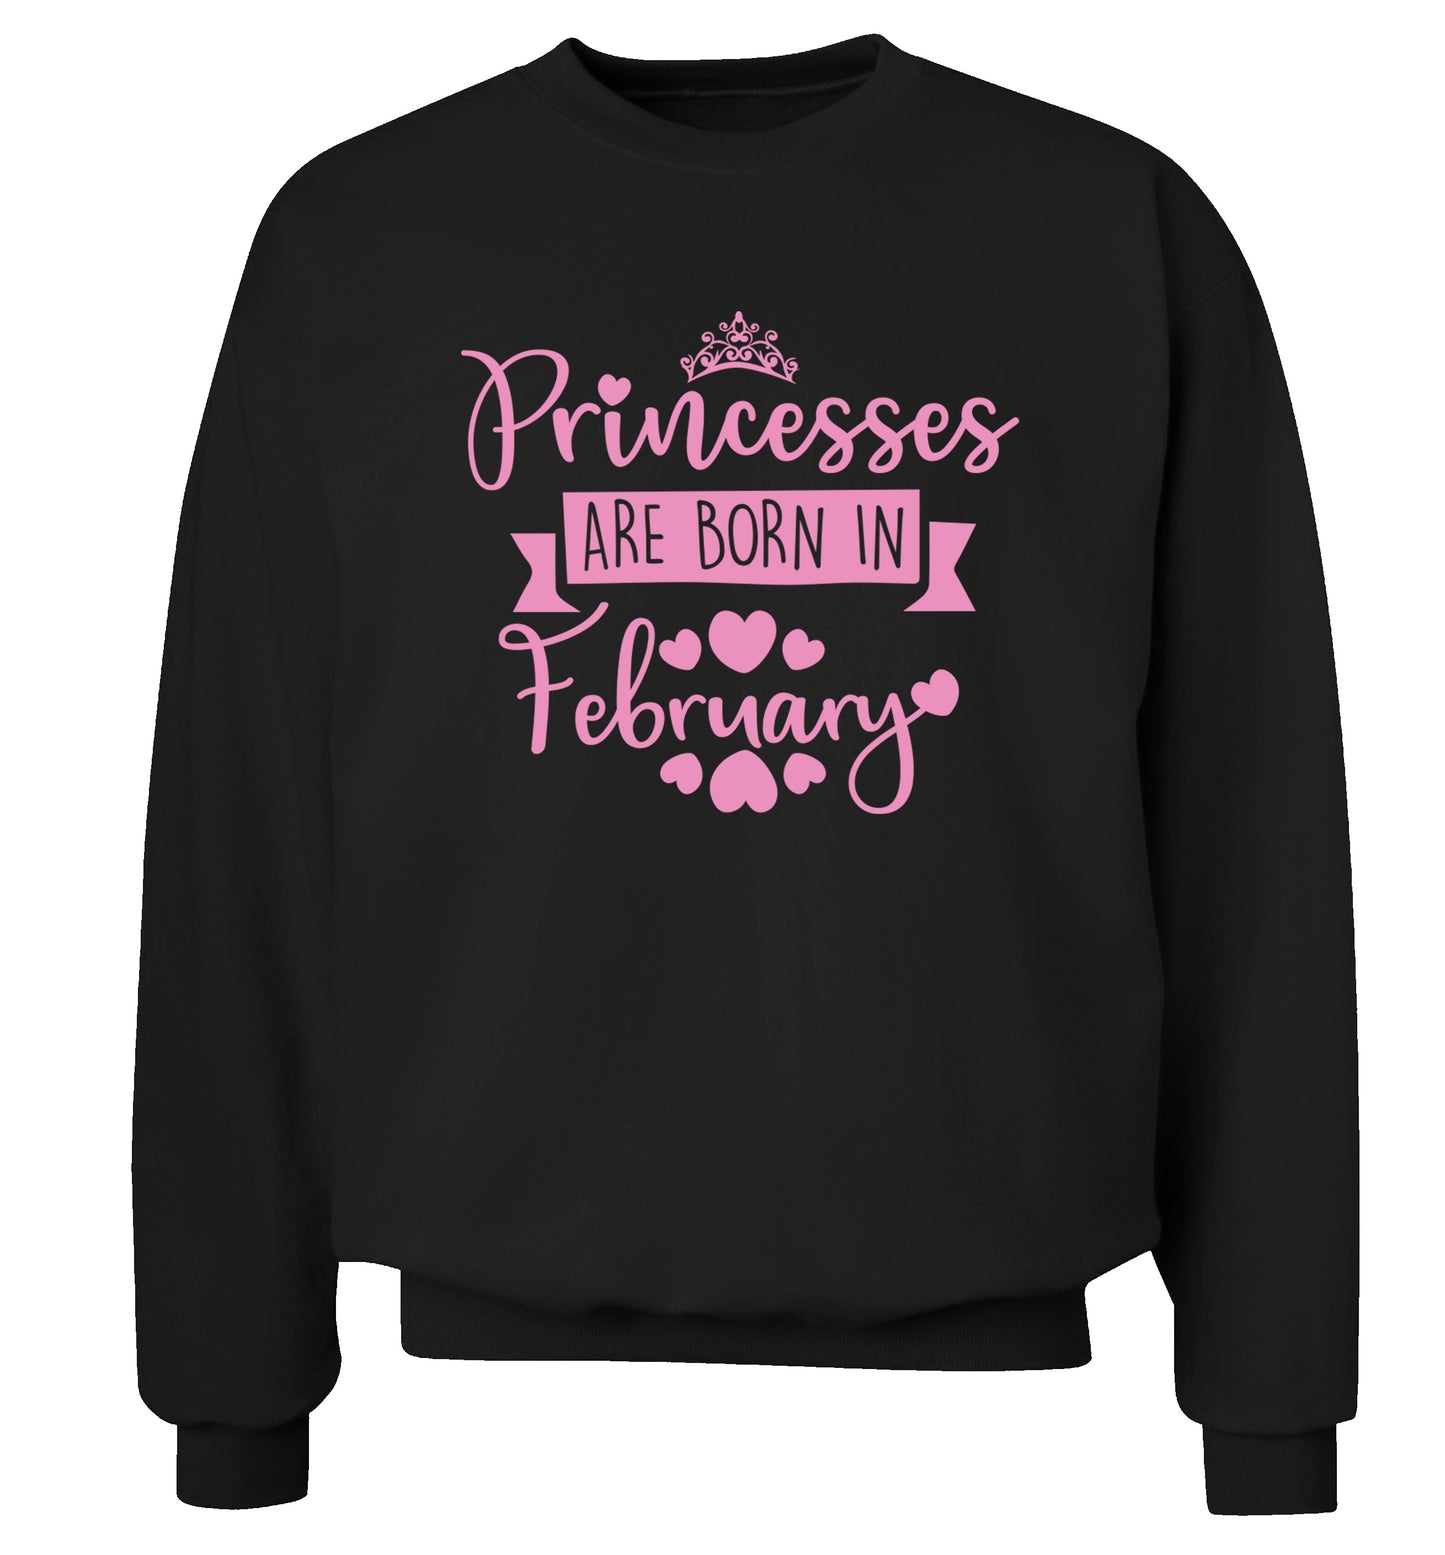 Princesses are born in February Adult's unisex black Sweater 2XL